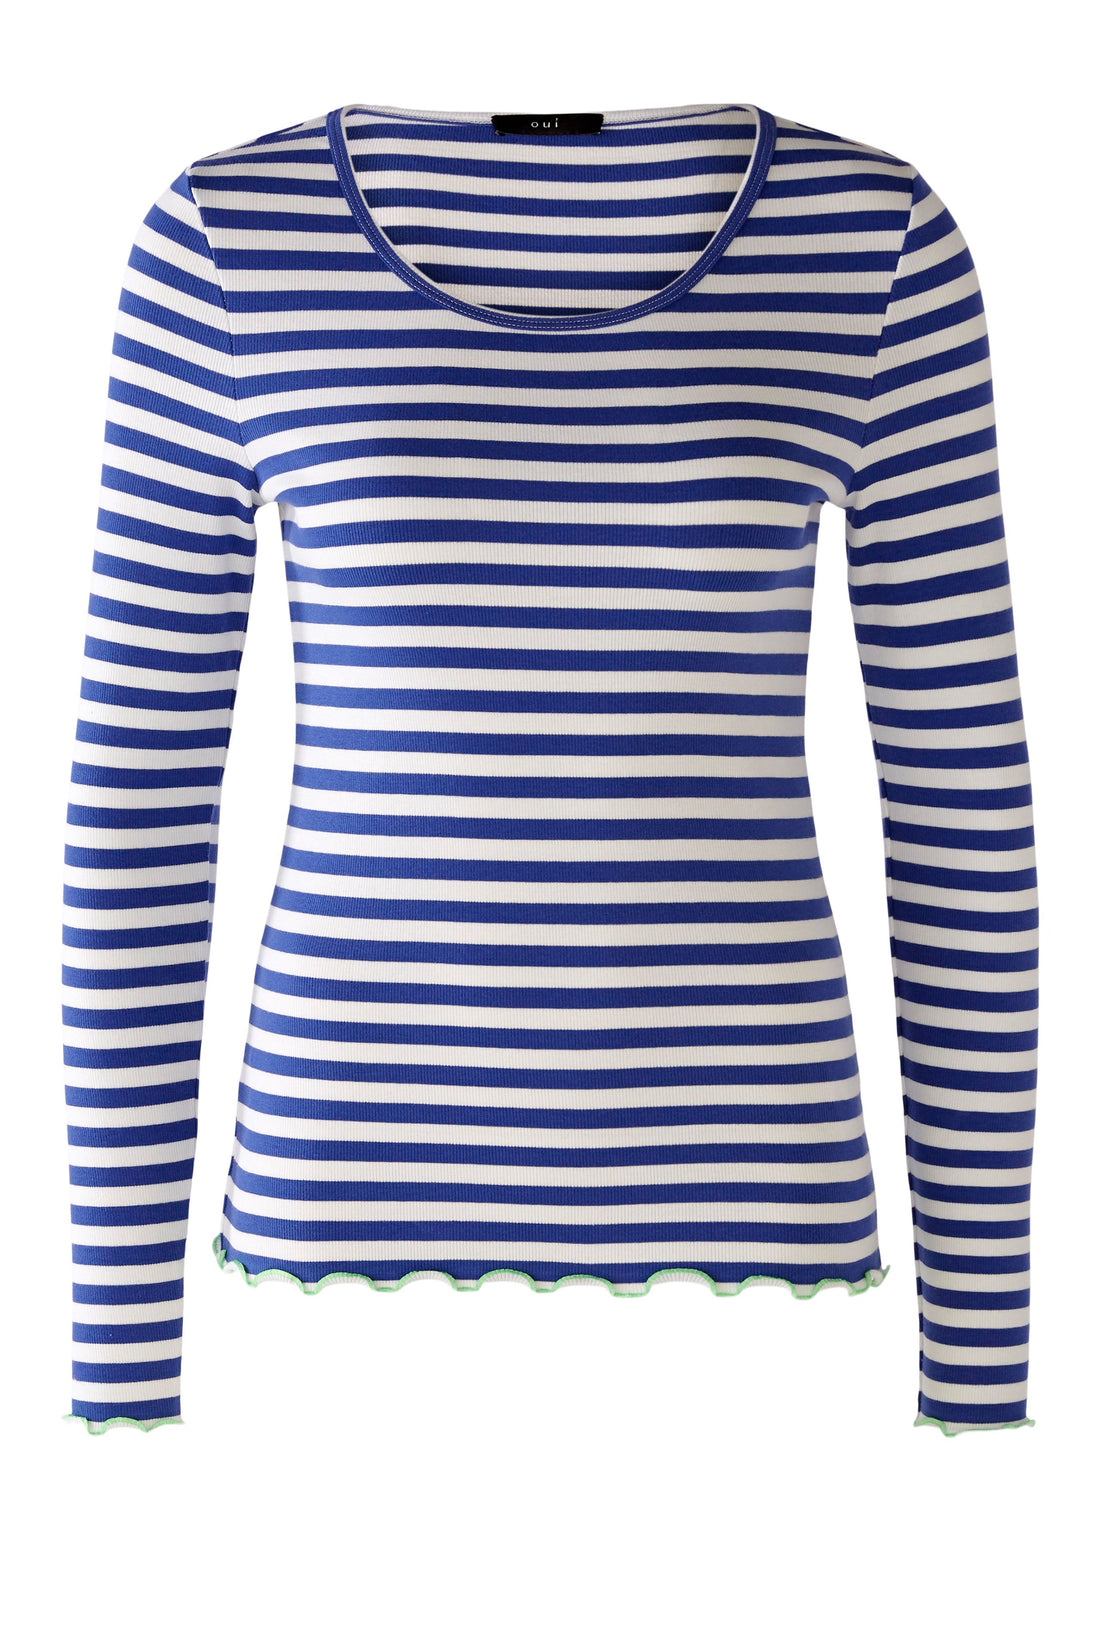 Oui -  Blue Striped Top with Contrast Curled Hem